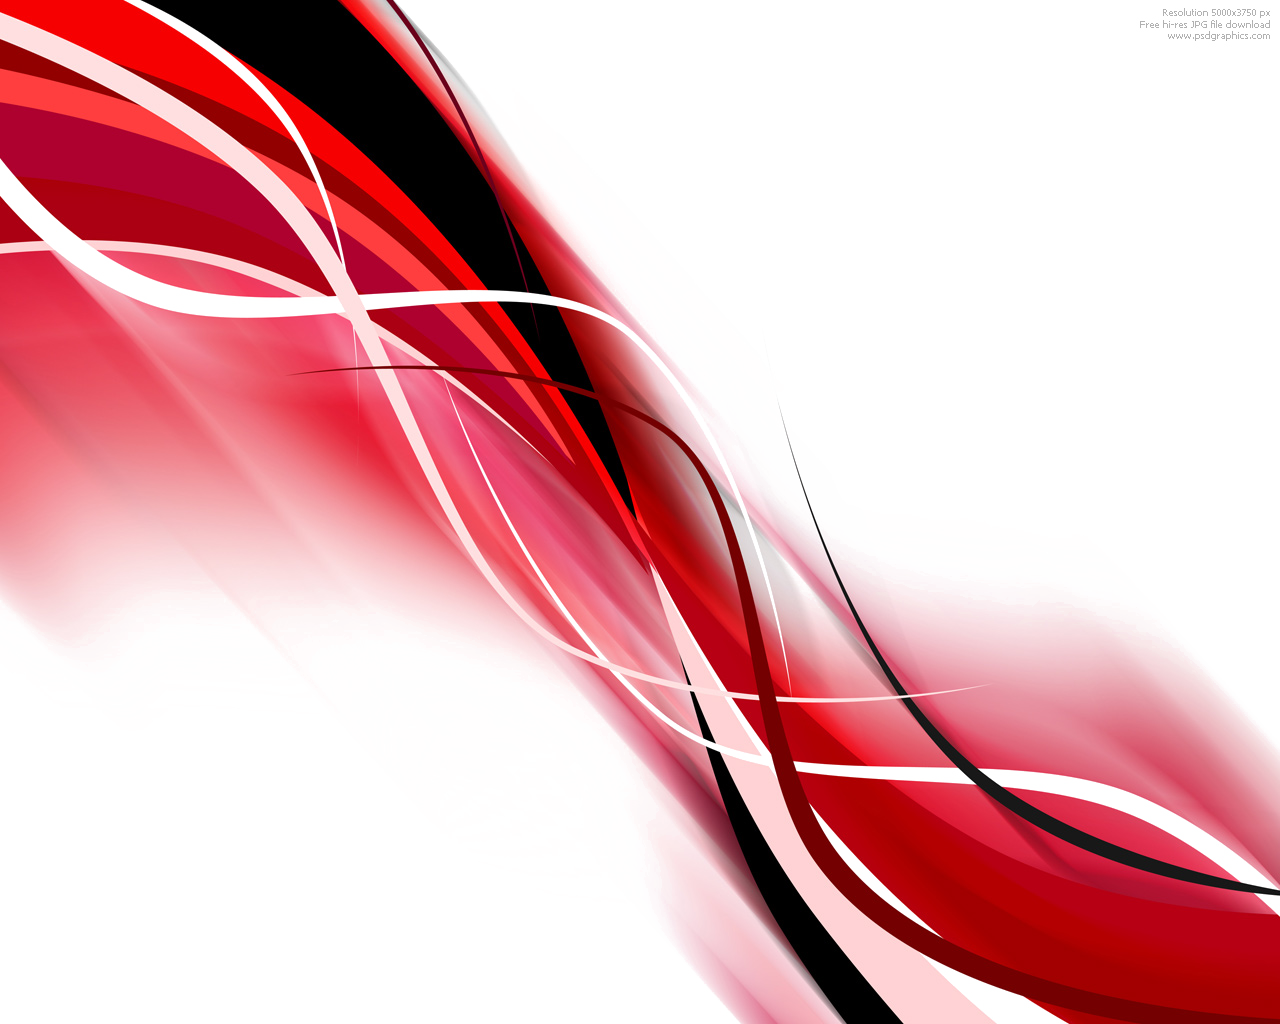 Red Abstract Lines PNG Transparent Image PNG, SVG Clip art for Web